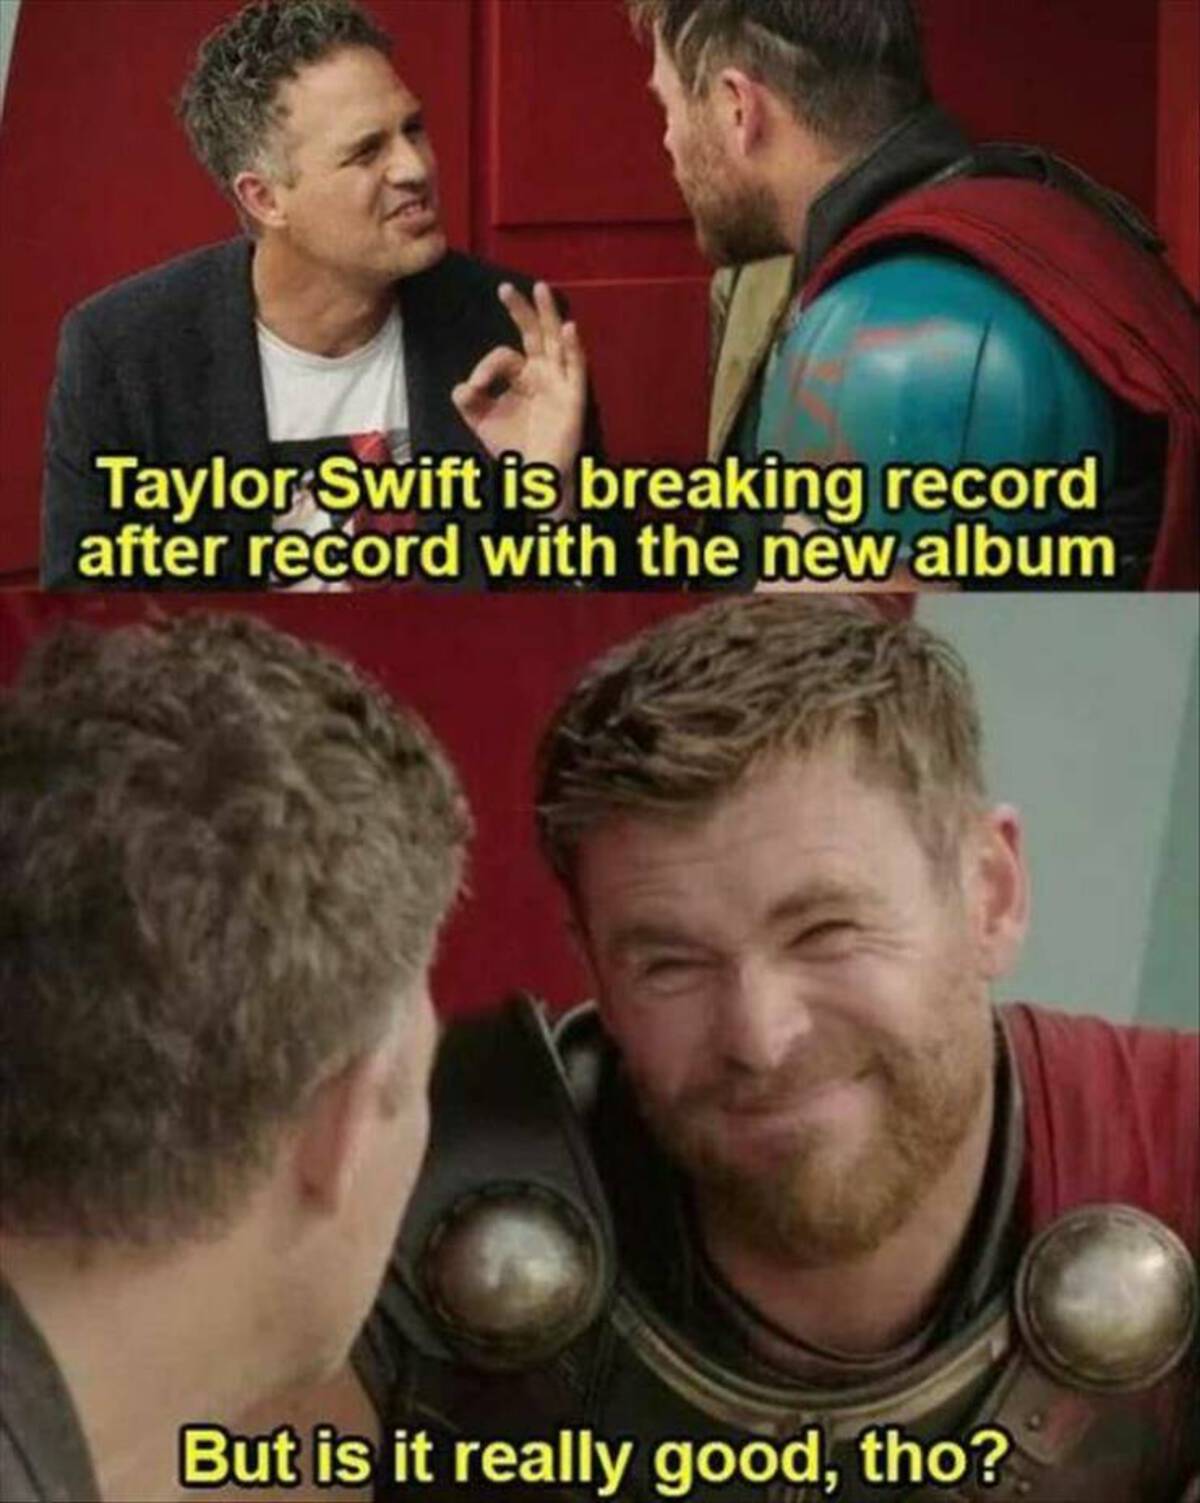 photo caption - Taylor Swift is breaking record after record with the new album But is it really good, tho?